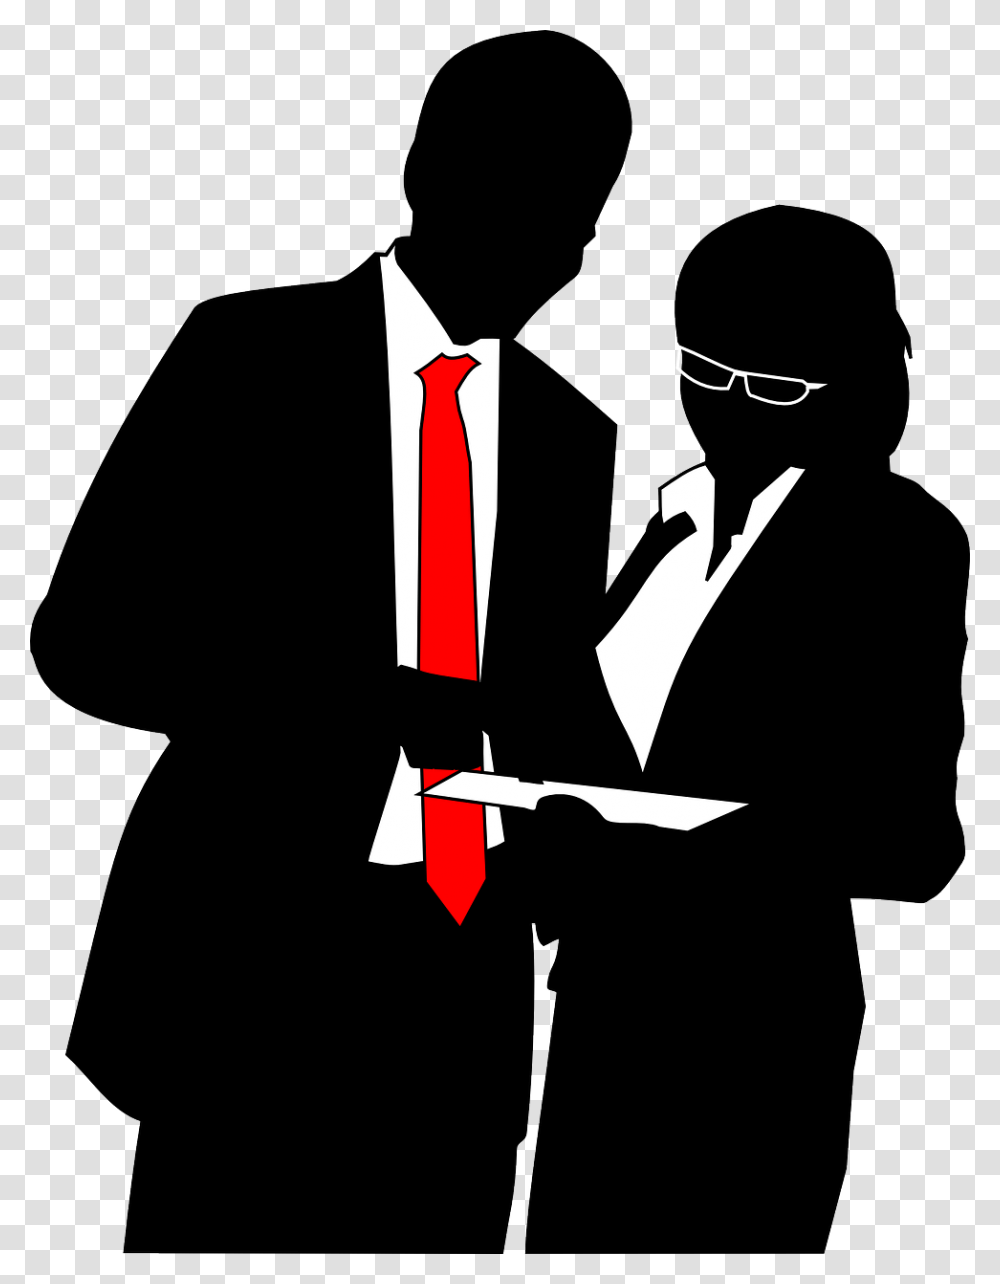 Human Business Woman And Man Silhouette, Person, Waiter, Tie, Accessories Transparent Png